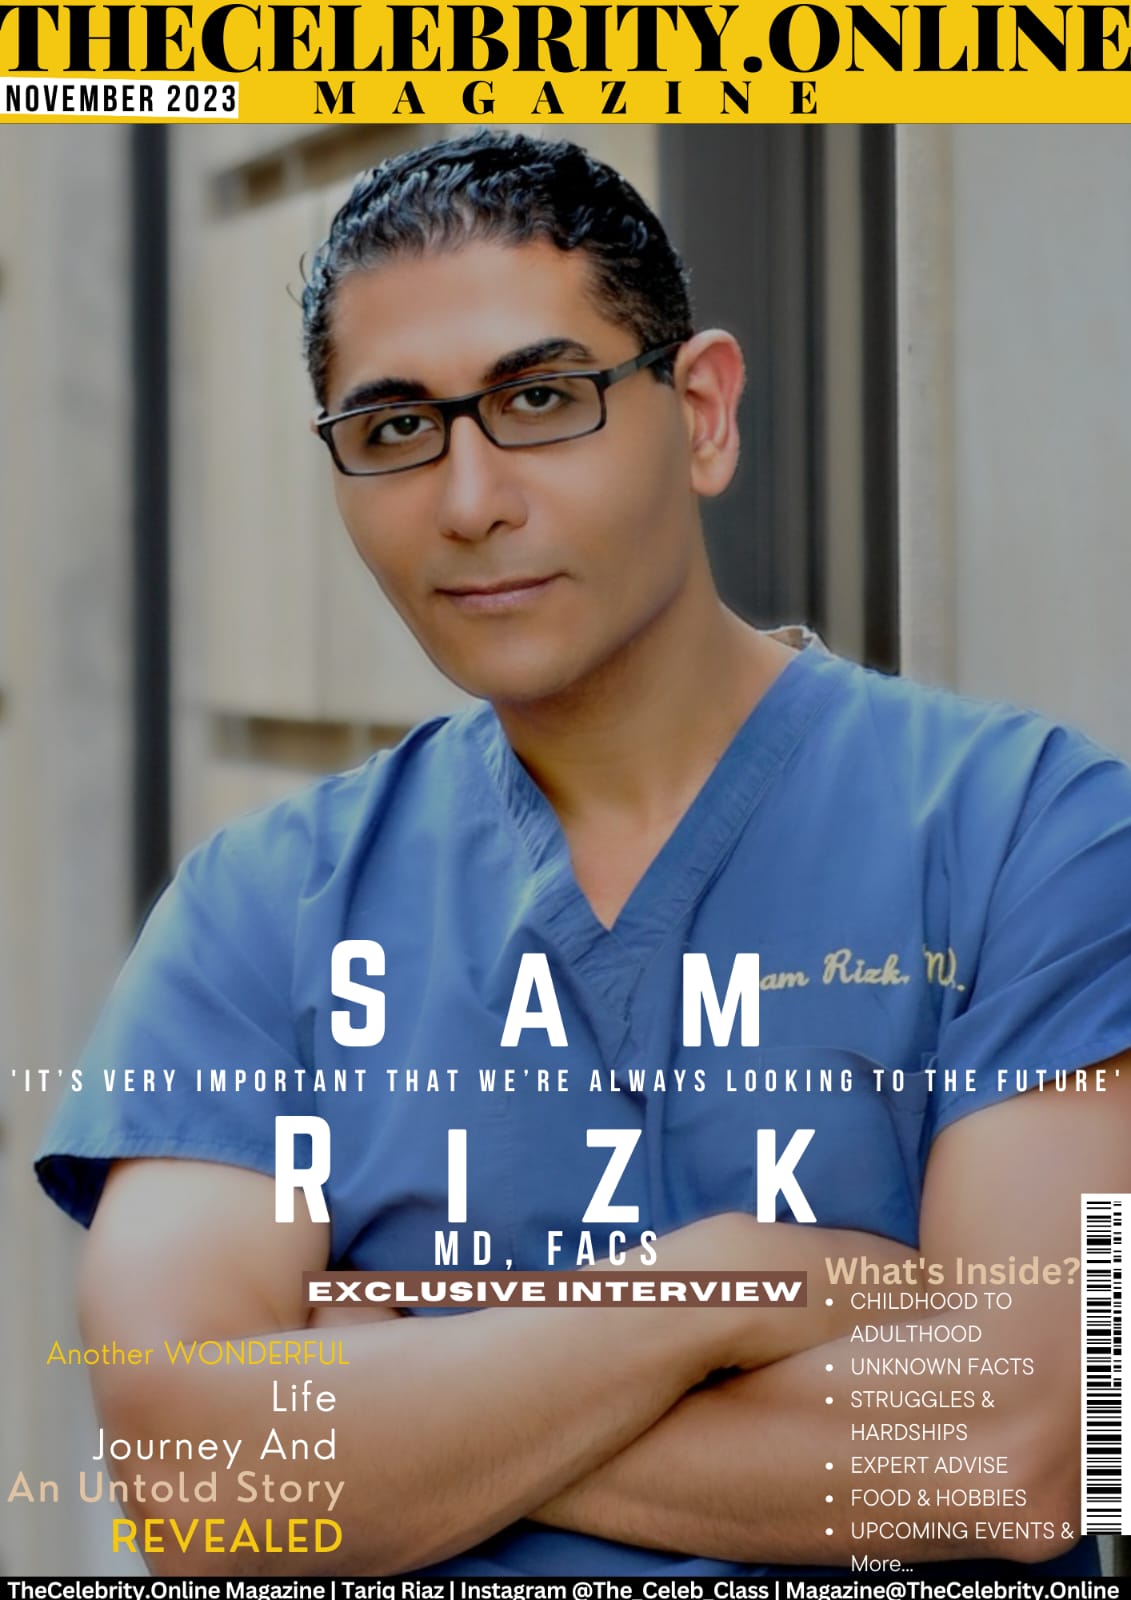 Sam Rizk, MD, FACS  Exclusive Interview – ‘It’s Very Important That We’re Always Looking To The Future’